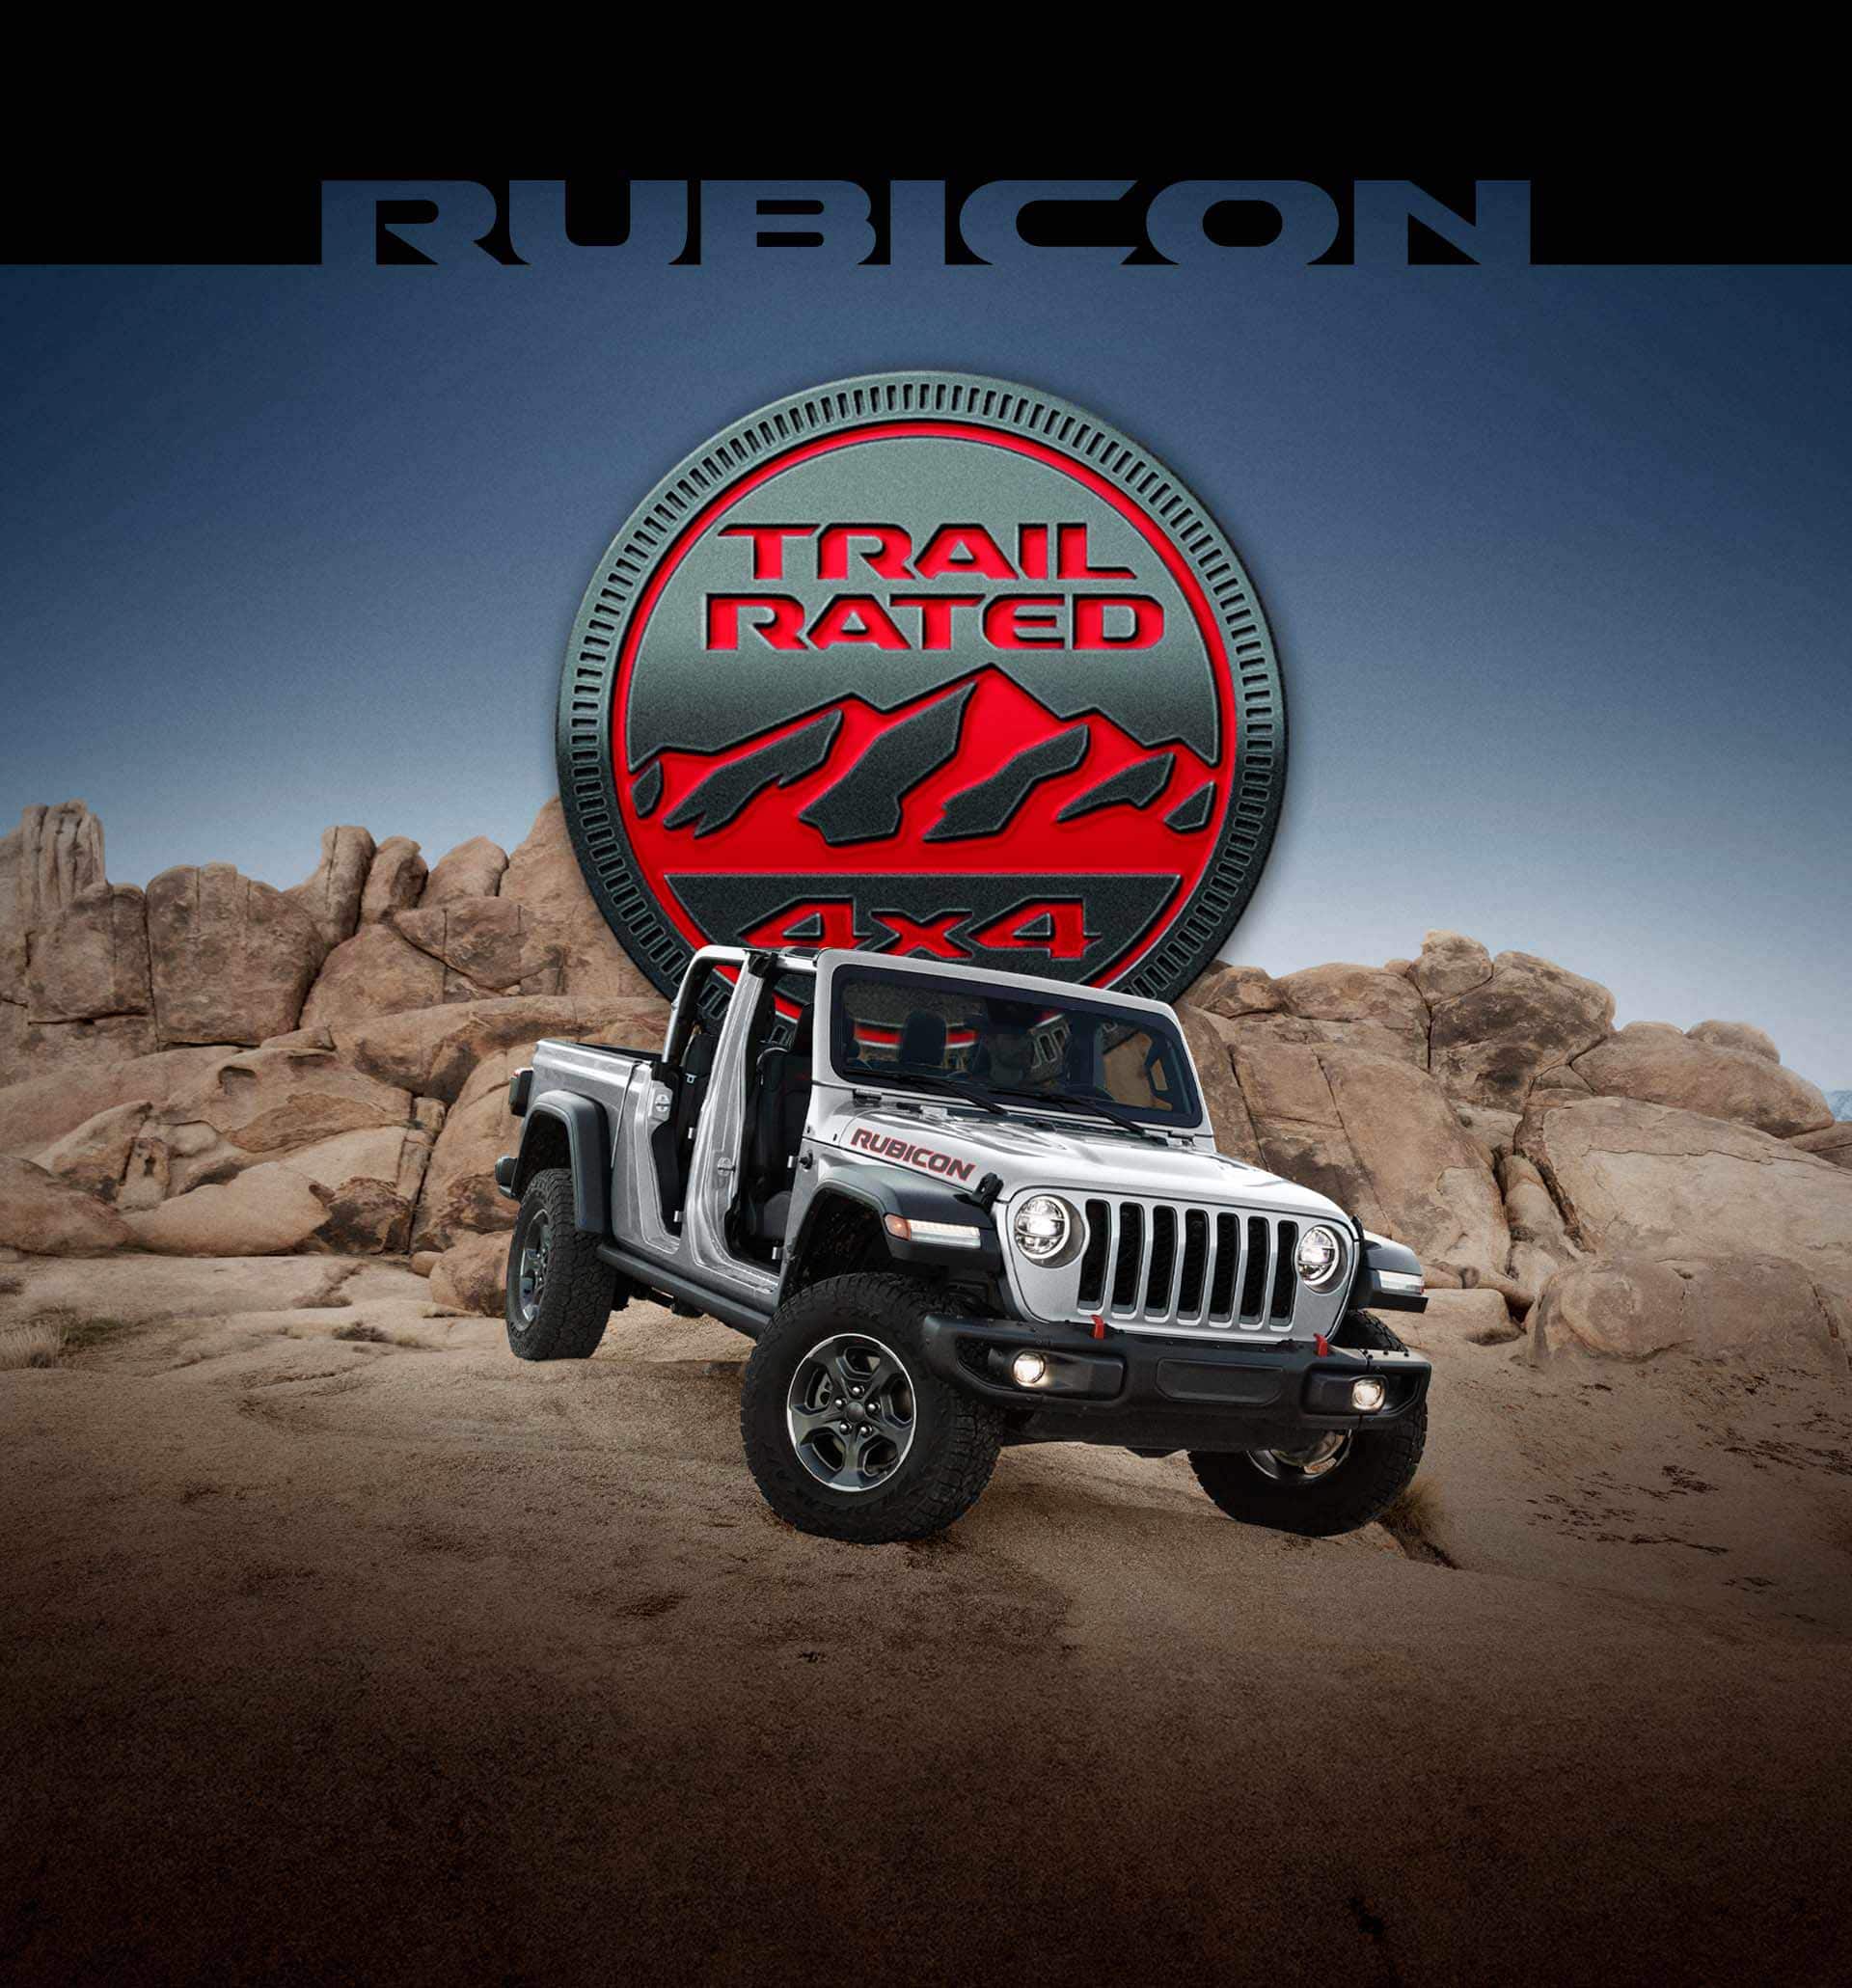 Rubicon. A 2023 Jeep Gladiator Rubicon with its doors and roof removed, beginning to descend a rocky hill, with the Trail Rated 4x4 logo superimposed overhead.